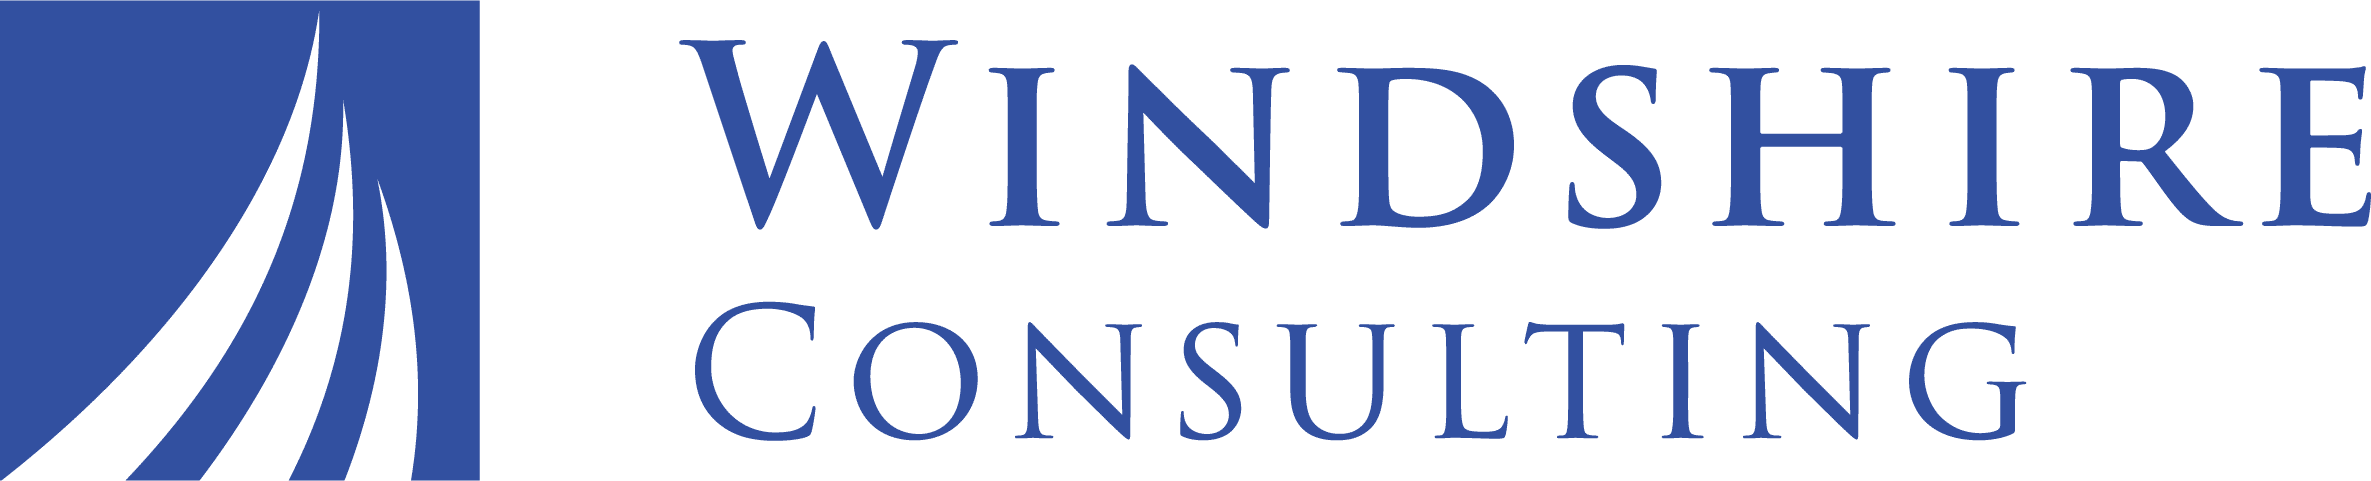 Windshire Consulting horizontal